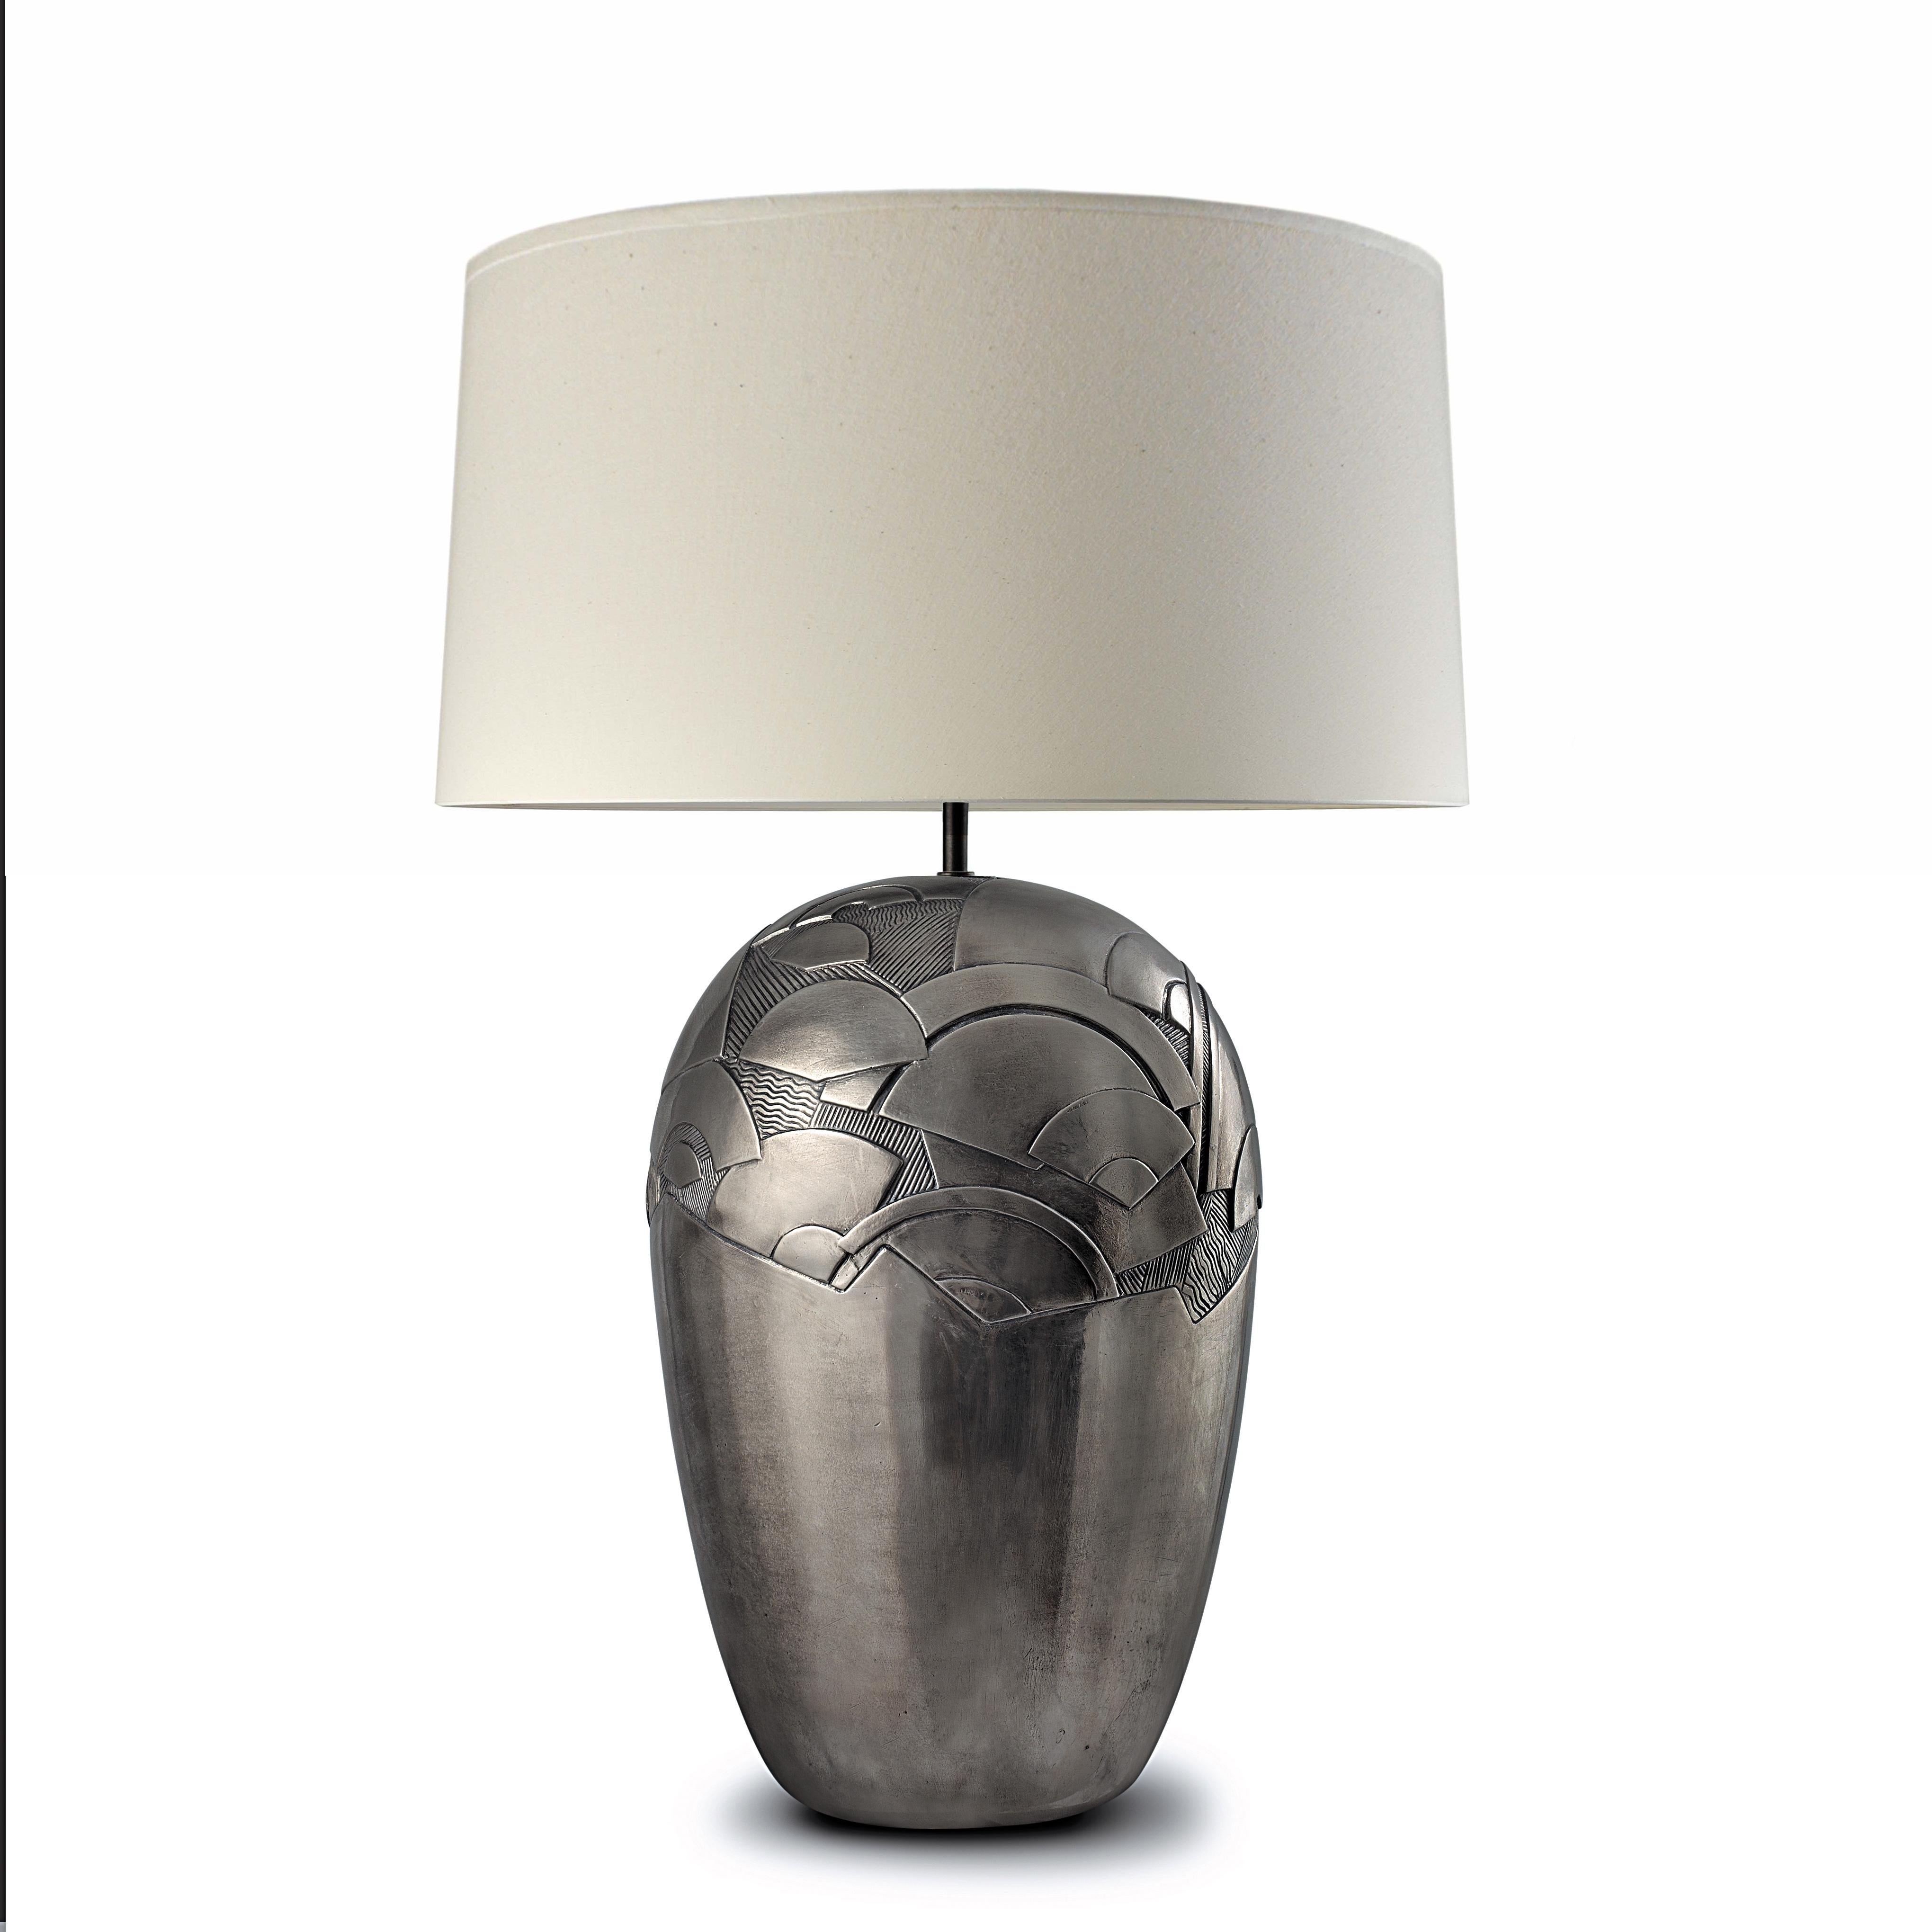 Contemporary Art Deco design handmade and hand-finished table lamp. We combine skilled craftsmanship with the finest materials to give shape to our designs. Its artisan finish makes each piece different from the other and easy to customize. Each